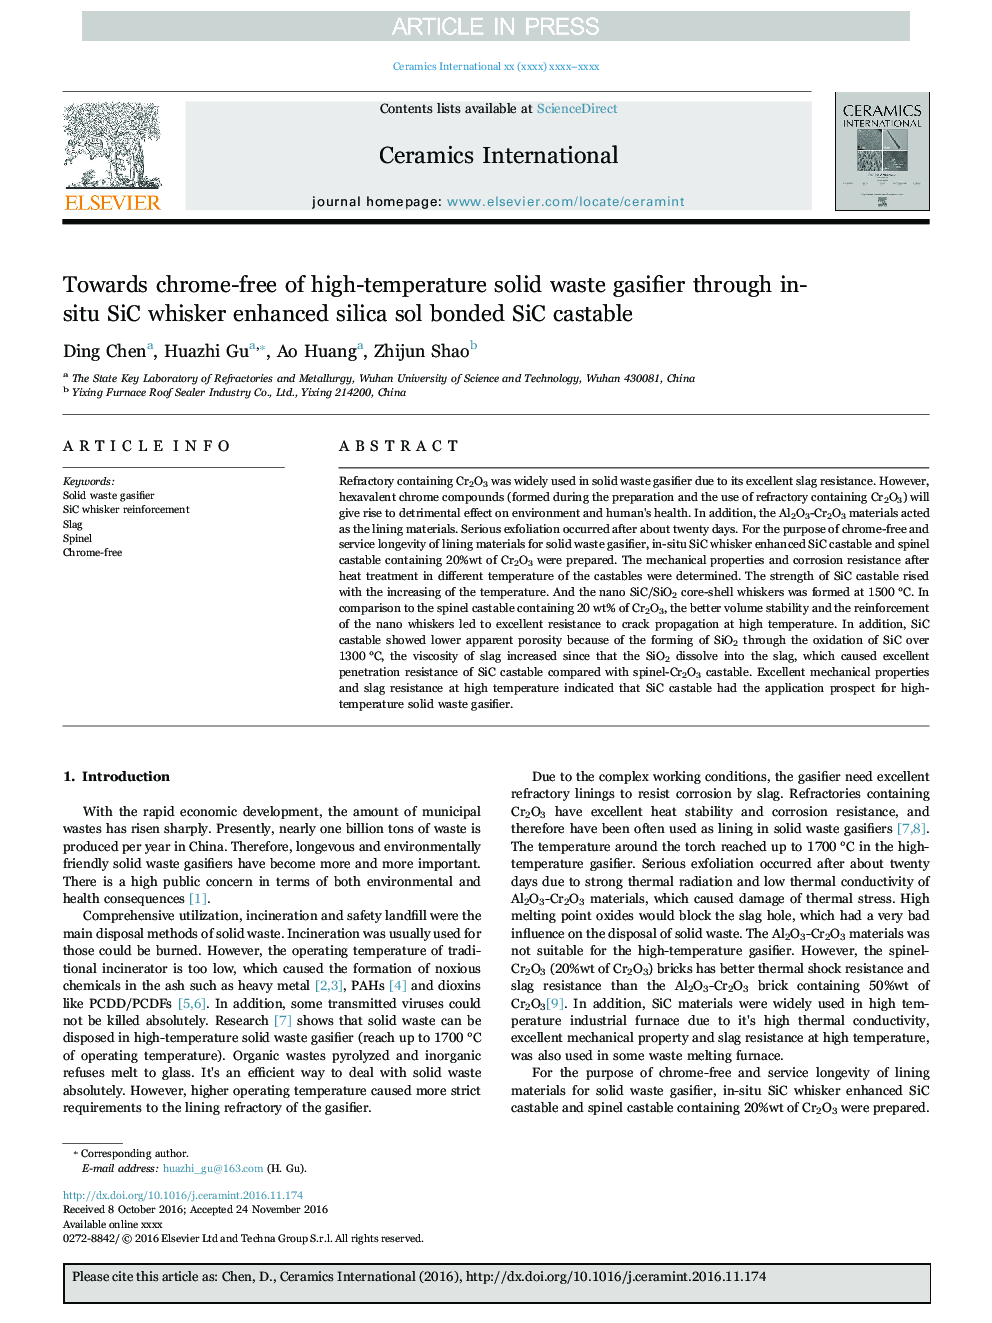 Towards chrome-free of high-temperature solid waste gasifier through in-situ SiC whisker enhanced silica sol bonded SiC castable